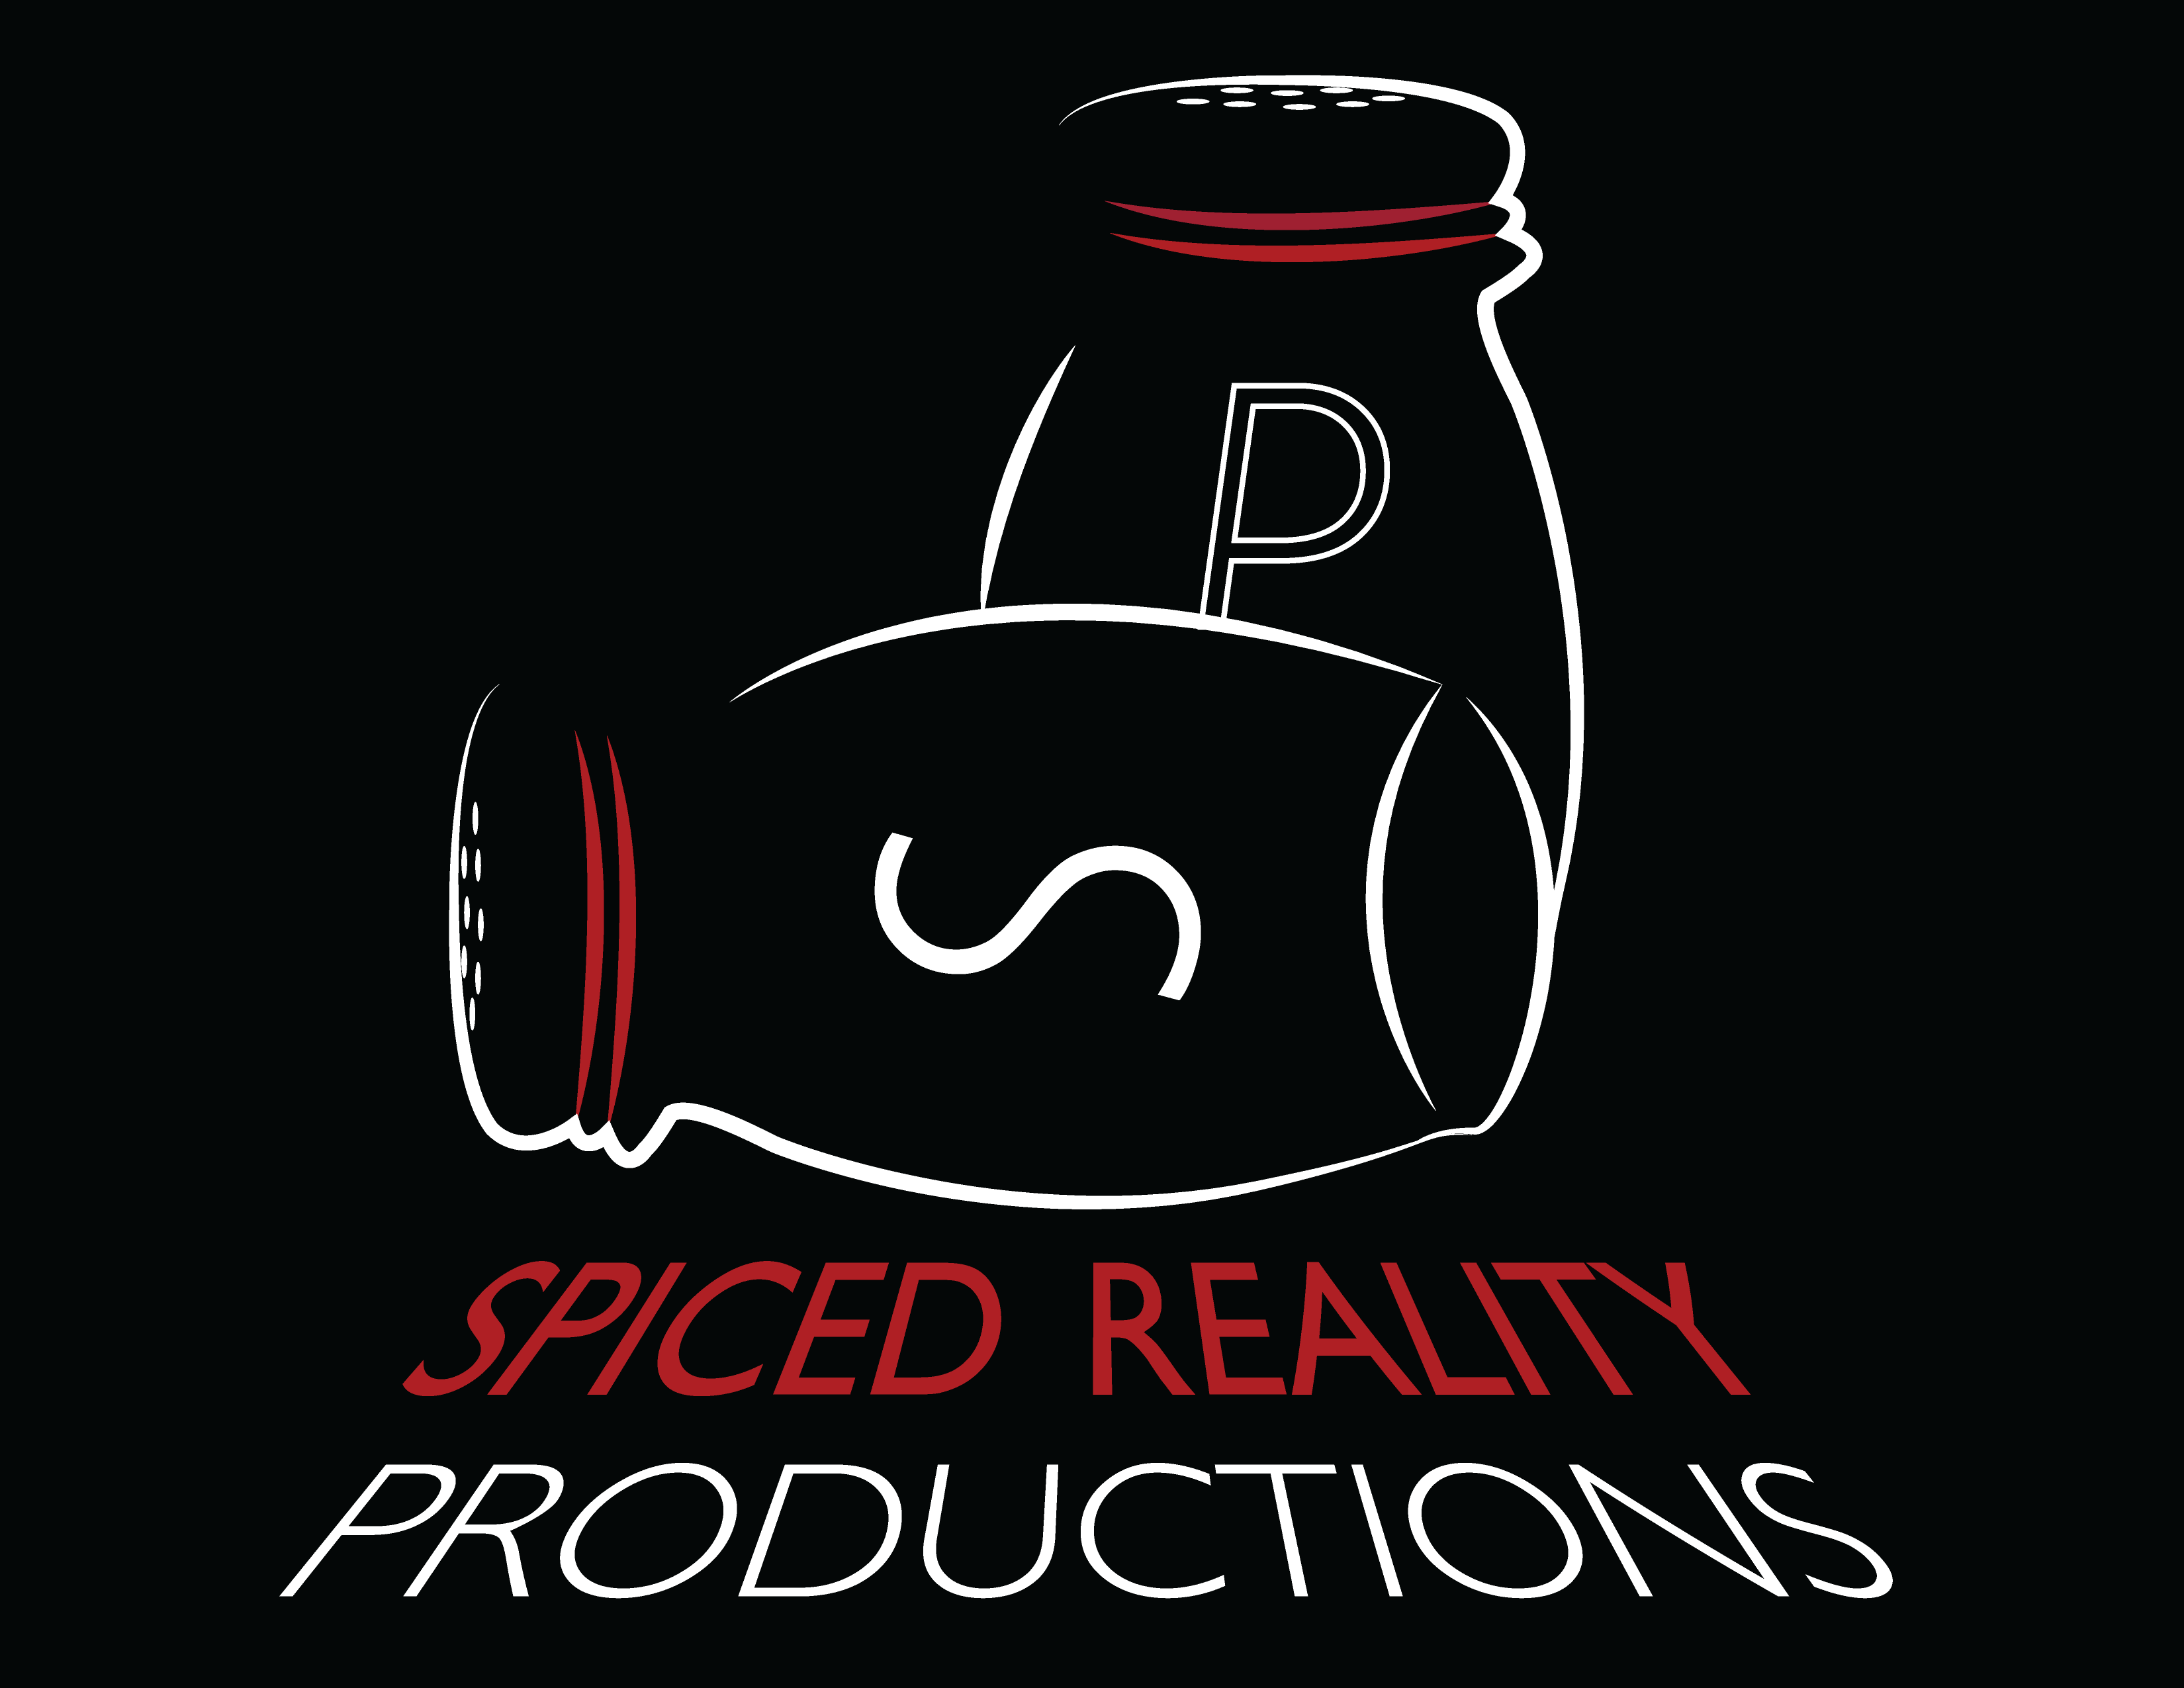 Film production company whose primary goal is to create reality -- but with that certain spice that makes you look, and think, twice.